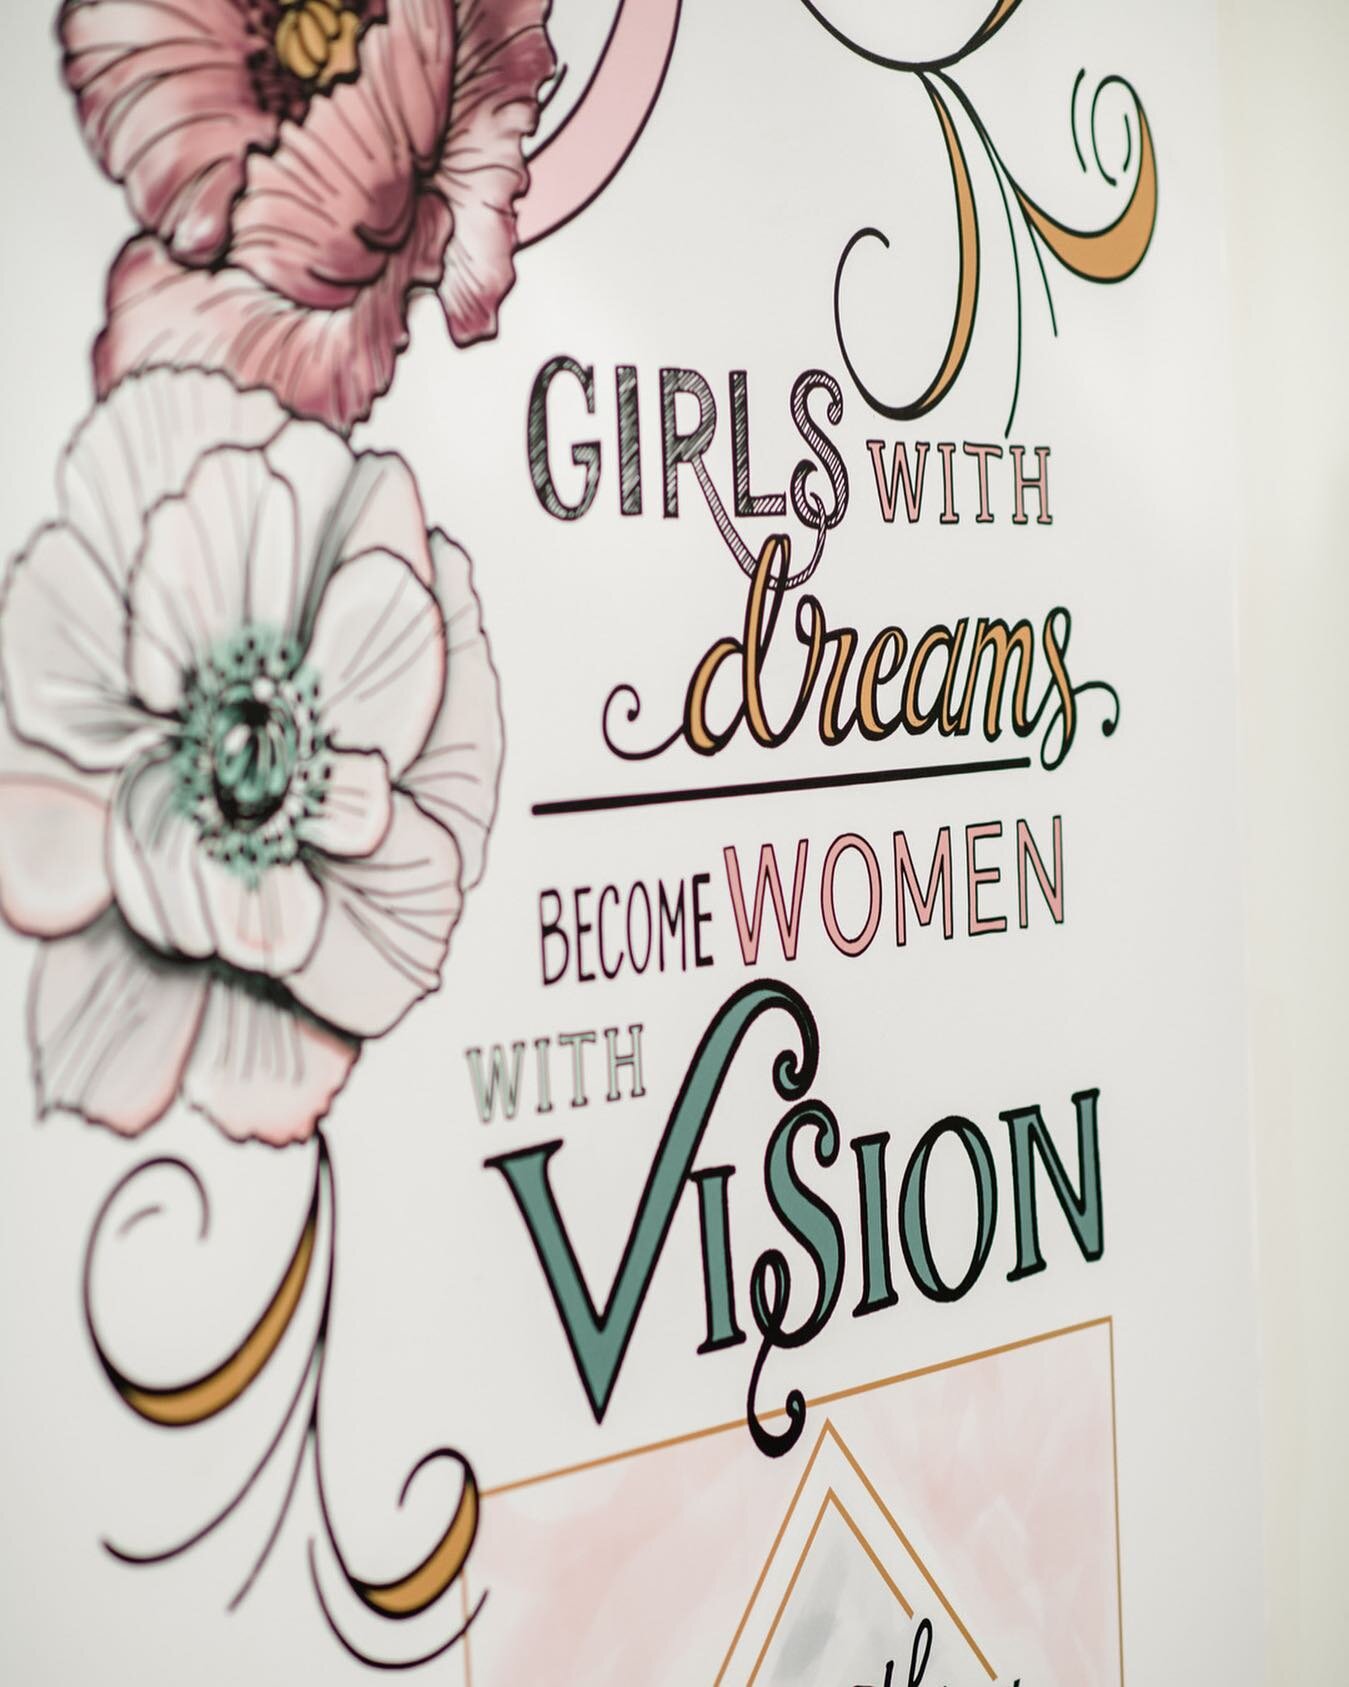 Girls with dreams become women with vision

The Collective615 mural outside our doors in the @landlmarket is giving us some mid-week inspiration to keep us going.

Collective615 is the perfect space to help you get out of a slump, block or whatever i